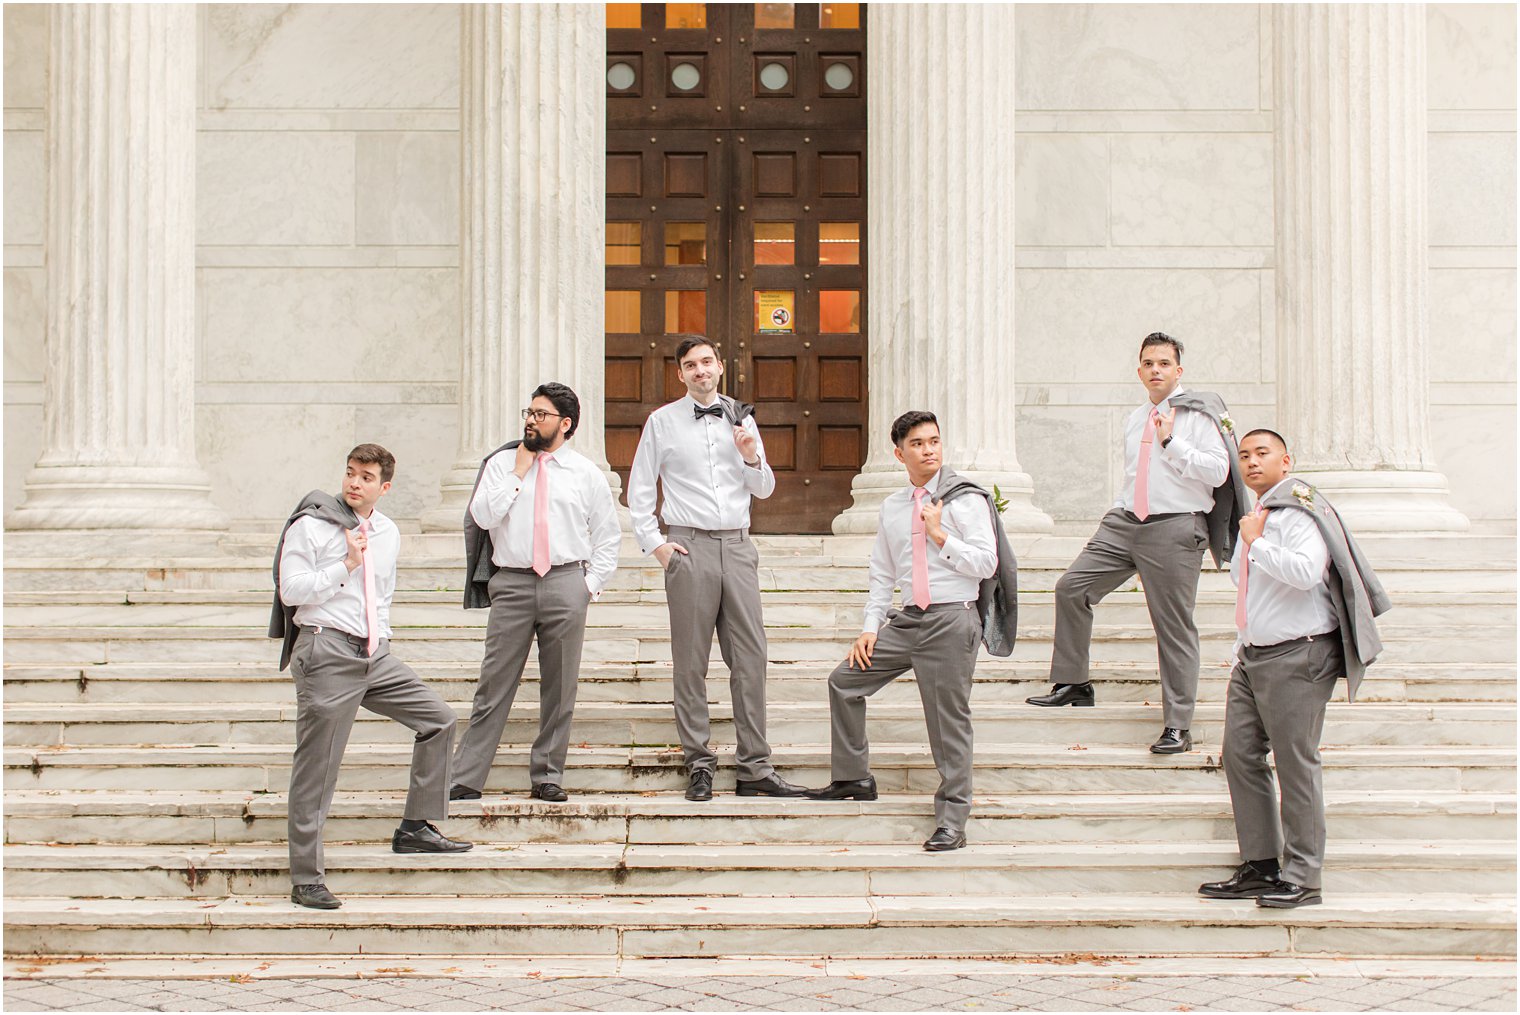 groom and groomsmen pose on steps of building at Princeton University